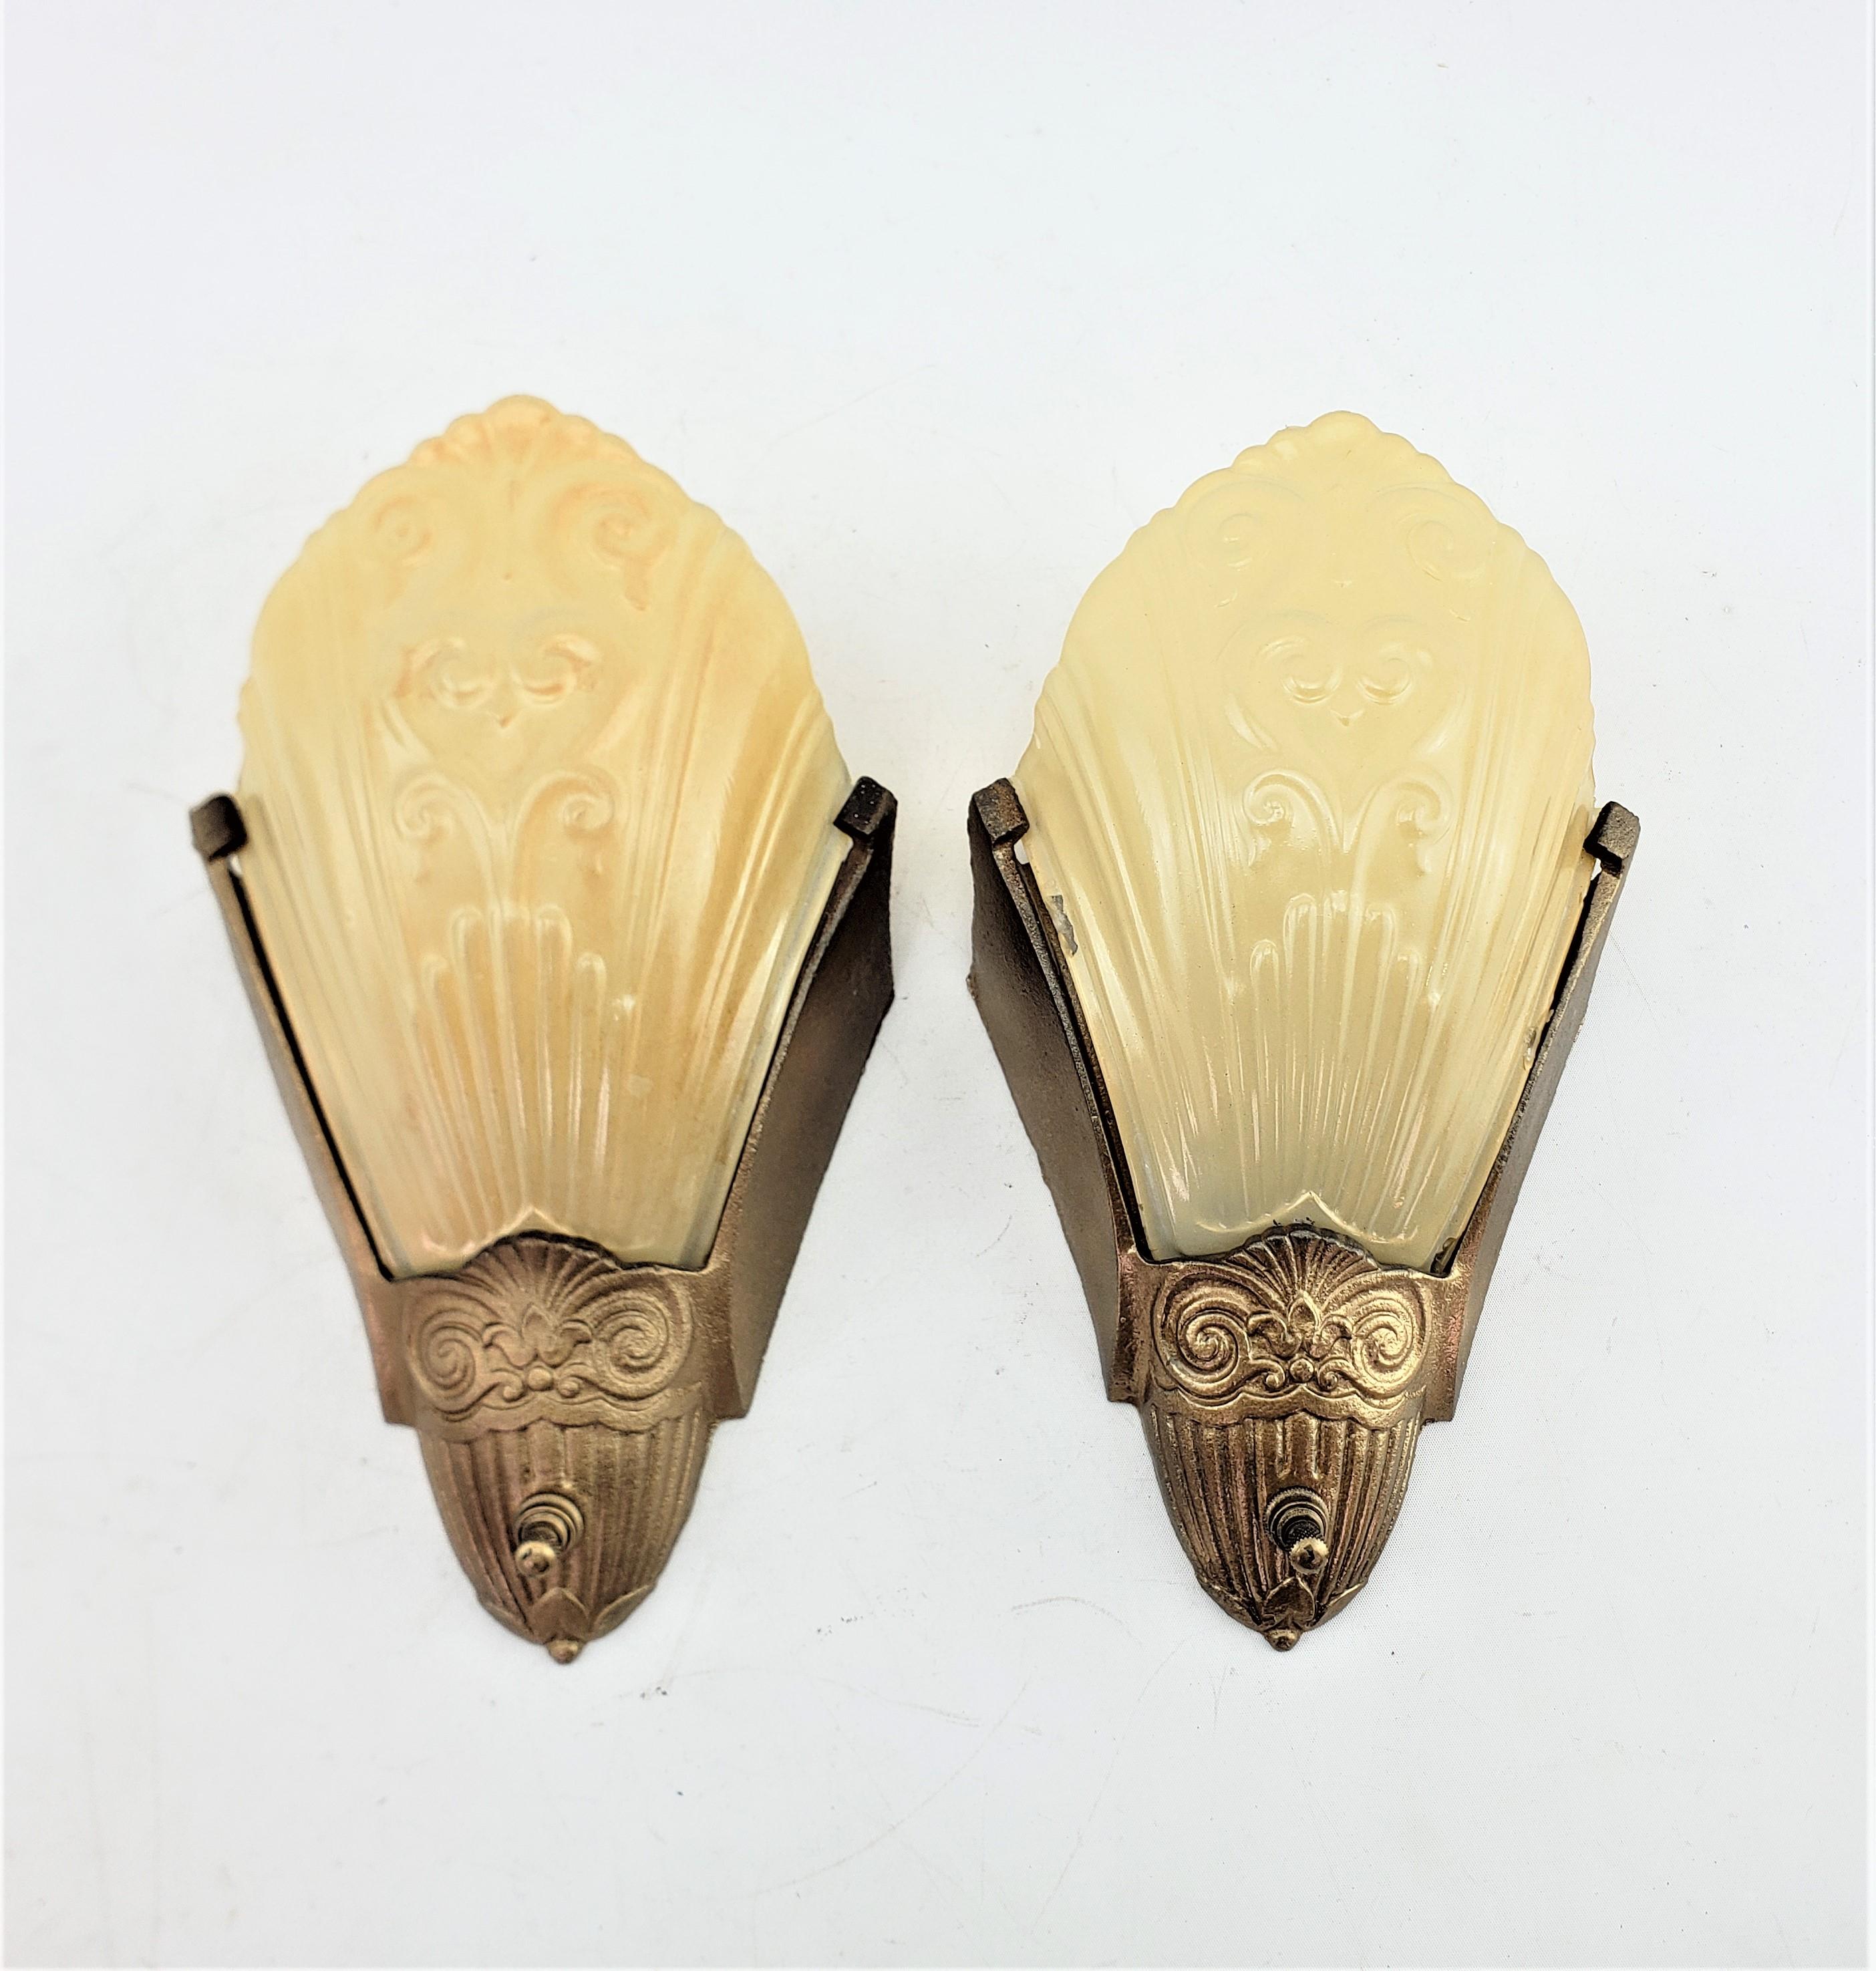 This pair of wall sconces were made by the well known J.C. Virden Co. of the United States and date to approximately 1920 and done in the period Art Deco style. The wall mounting brackets are done in a cast metal with a bronze patination, and the